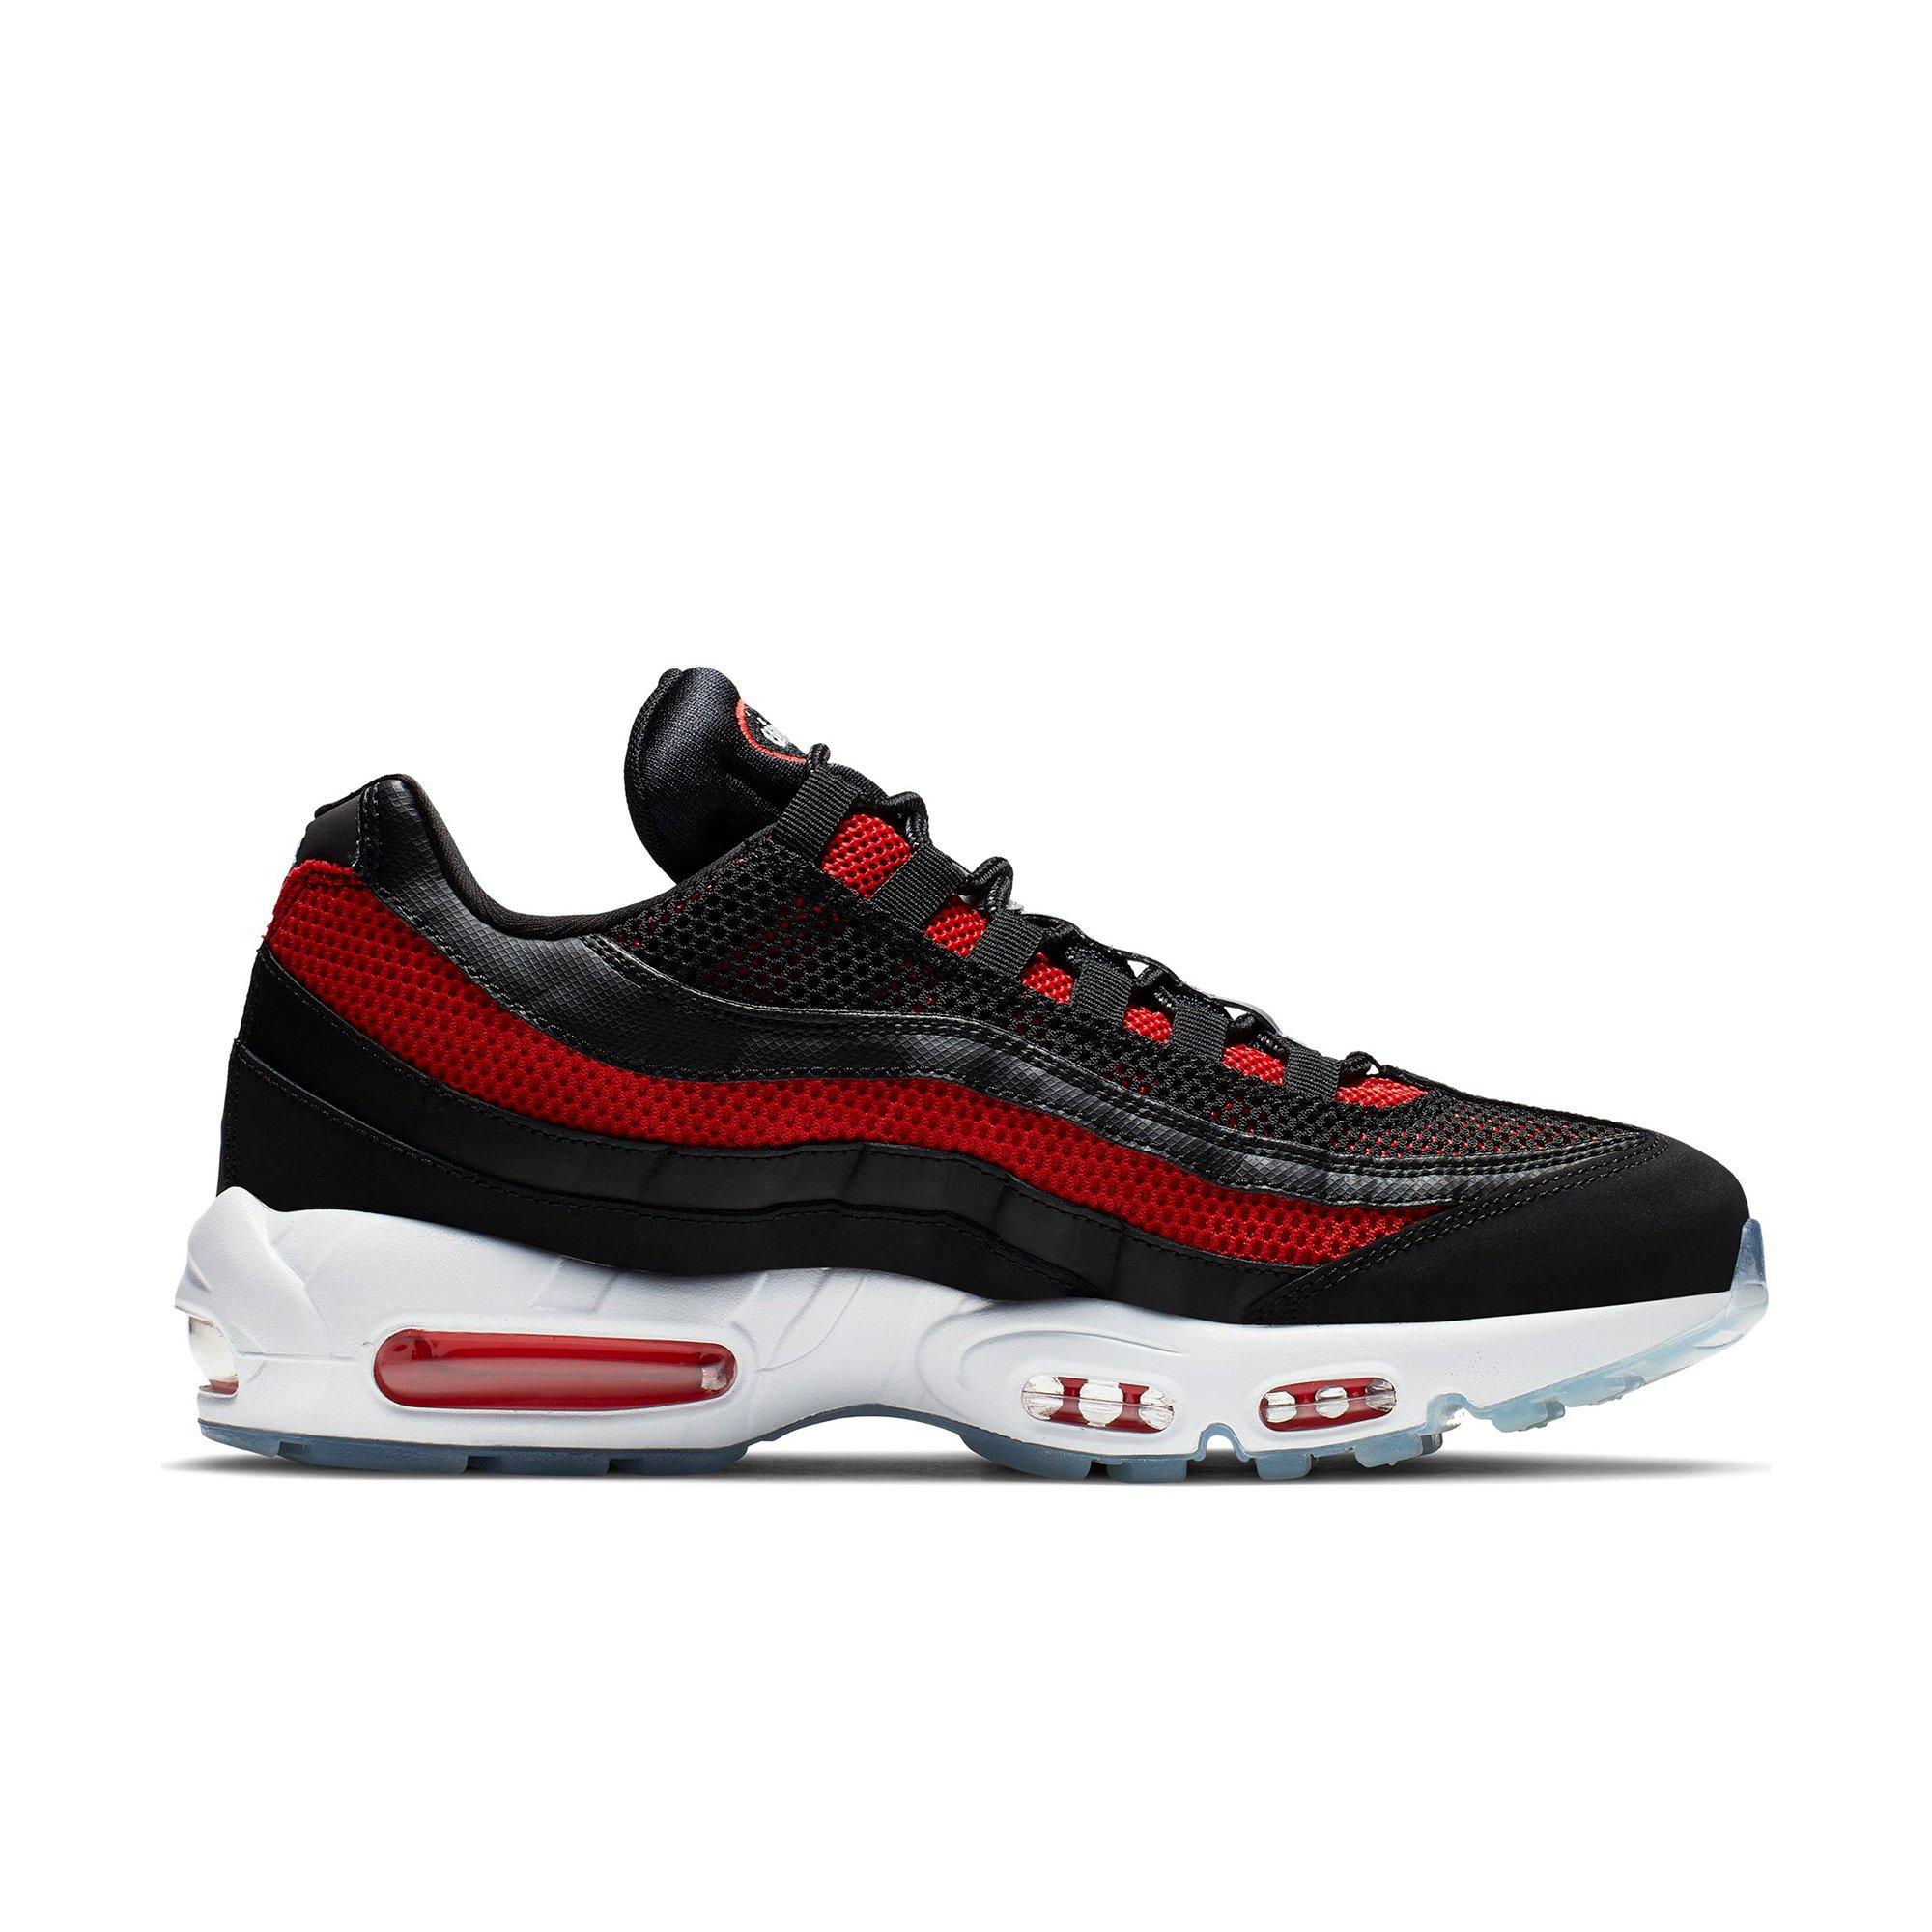 nike 95 red and black